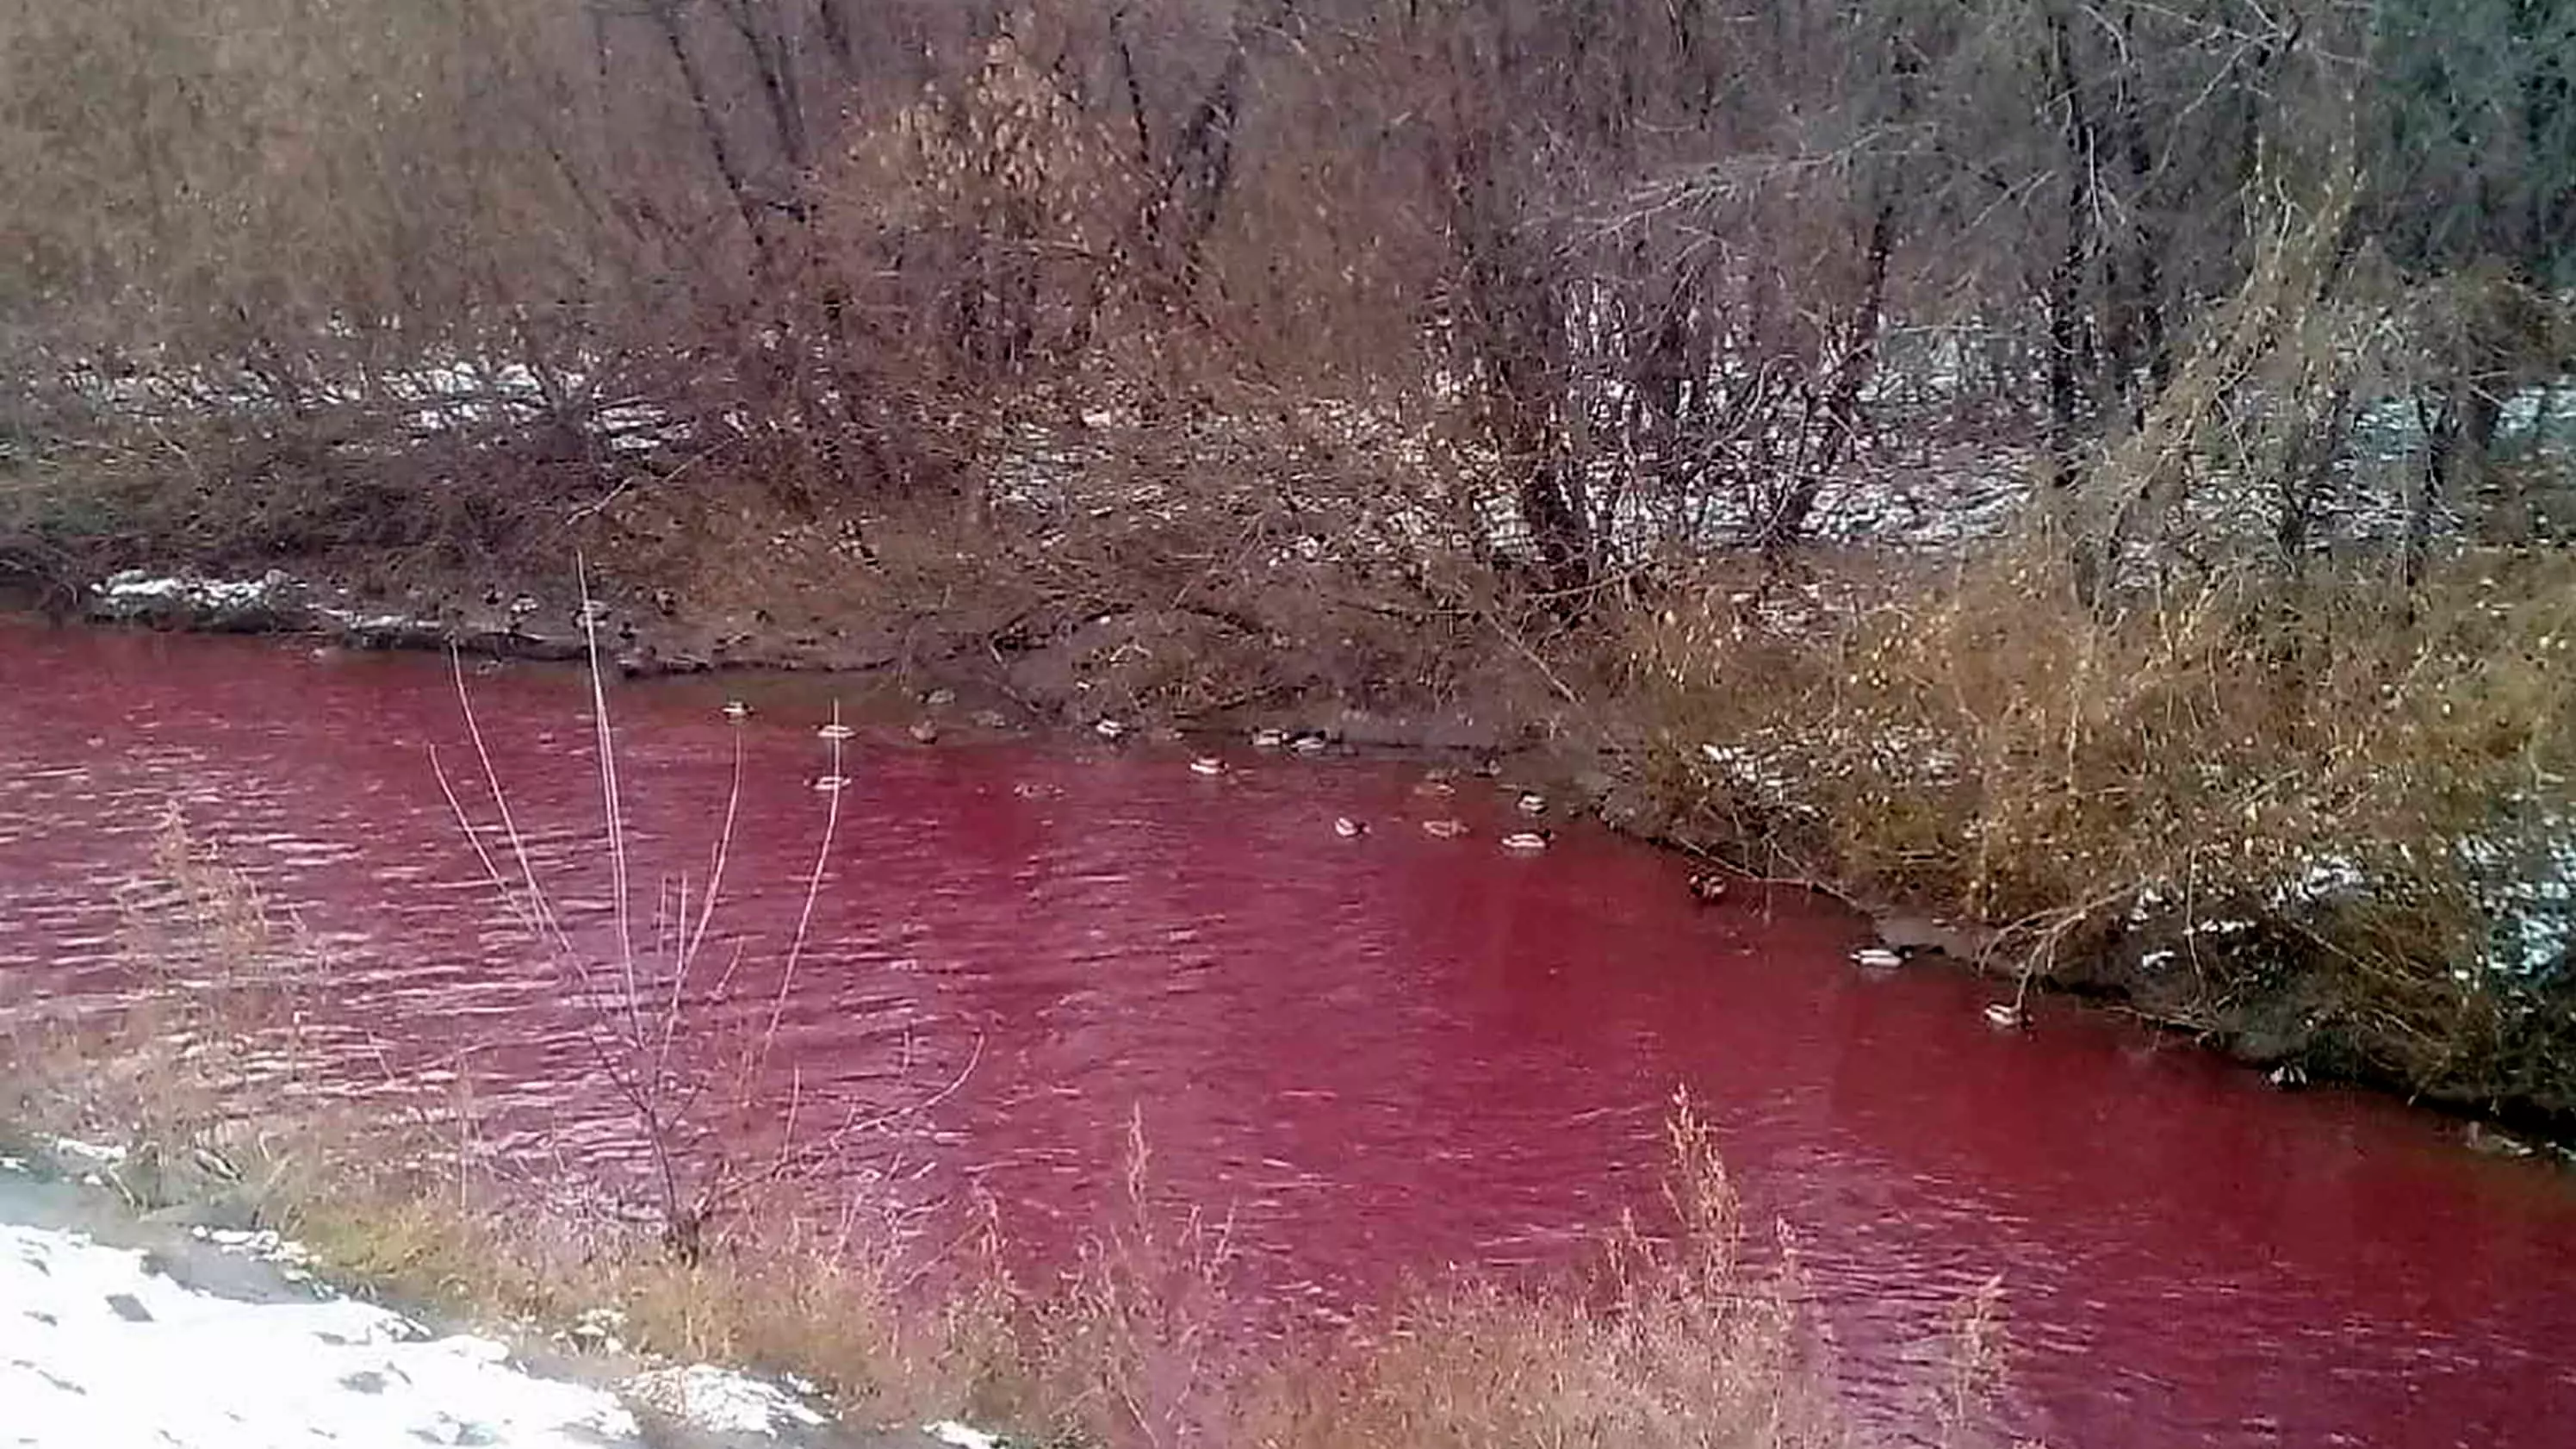 Locals Horrified After Russian River Turns Red Due To Mystery Pollution